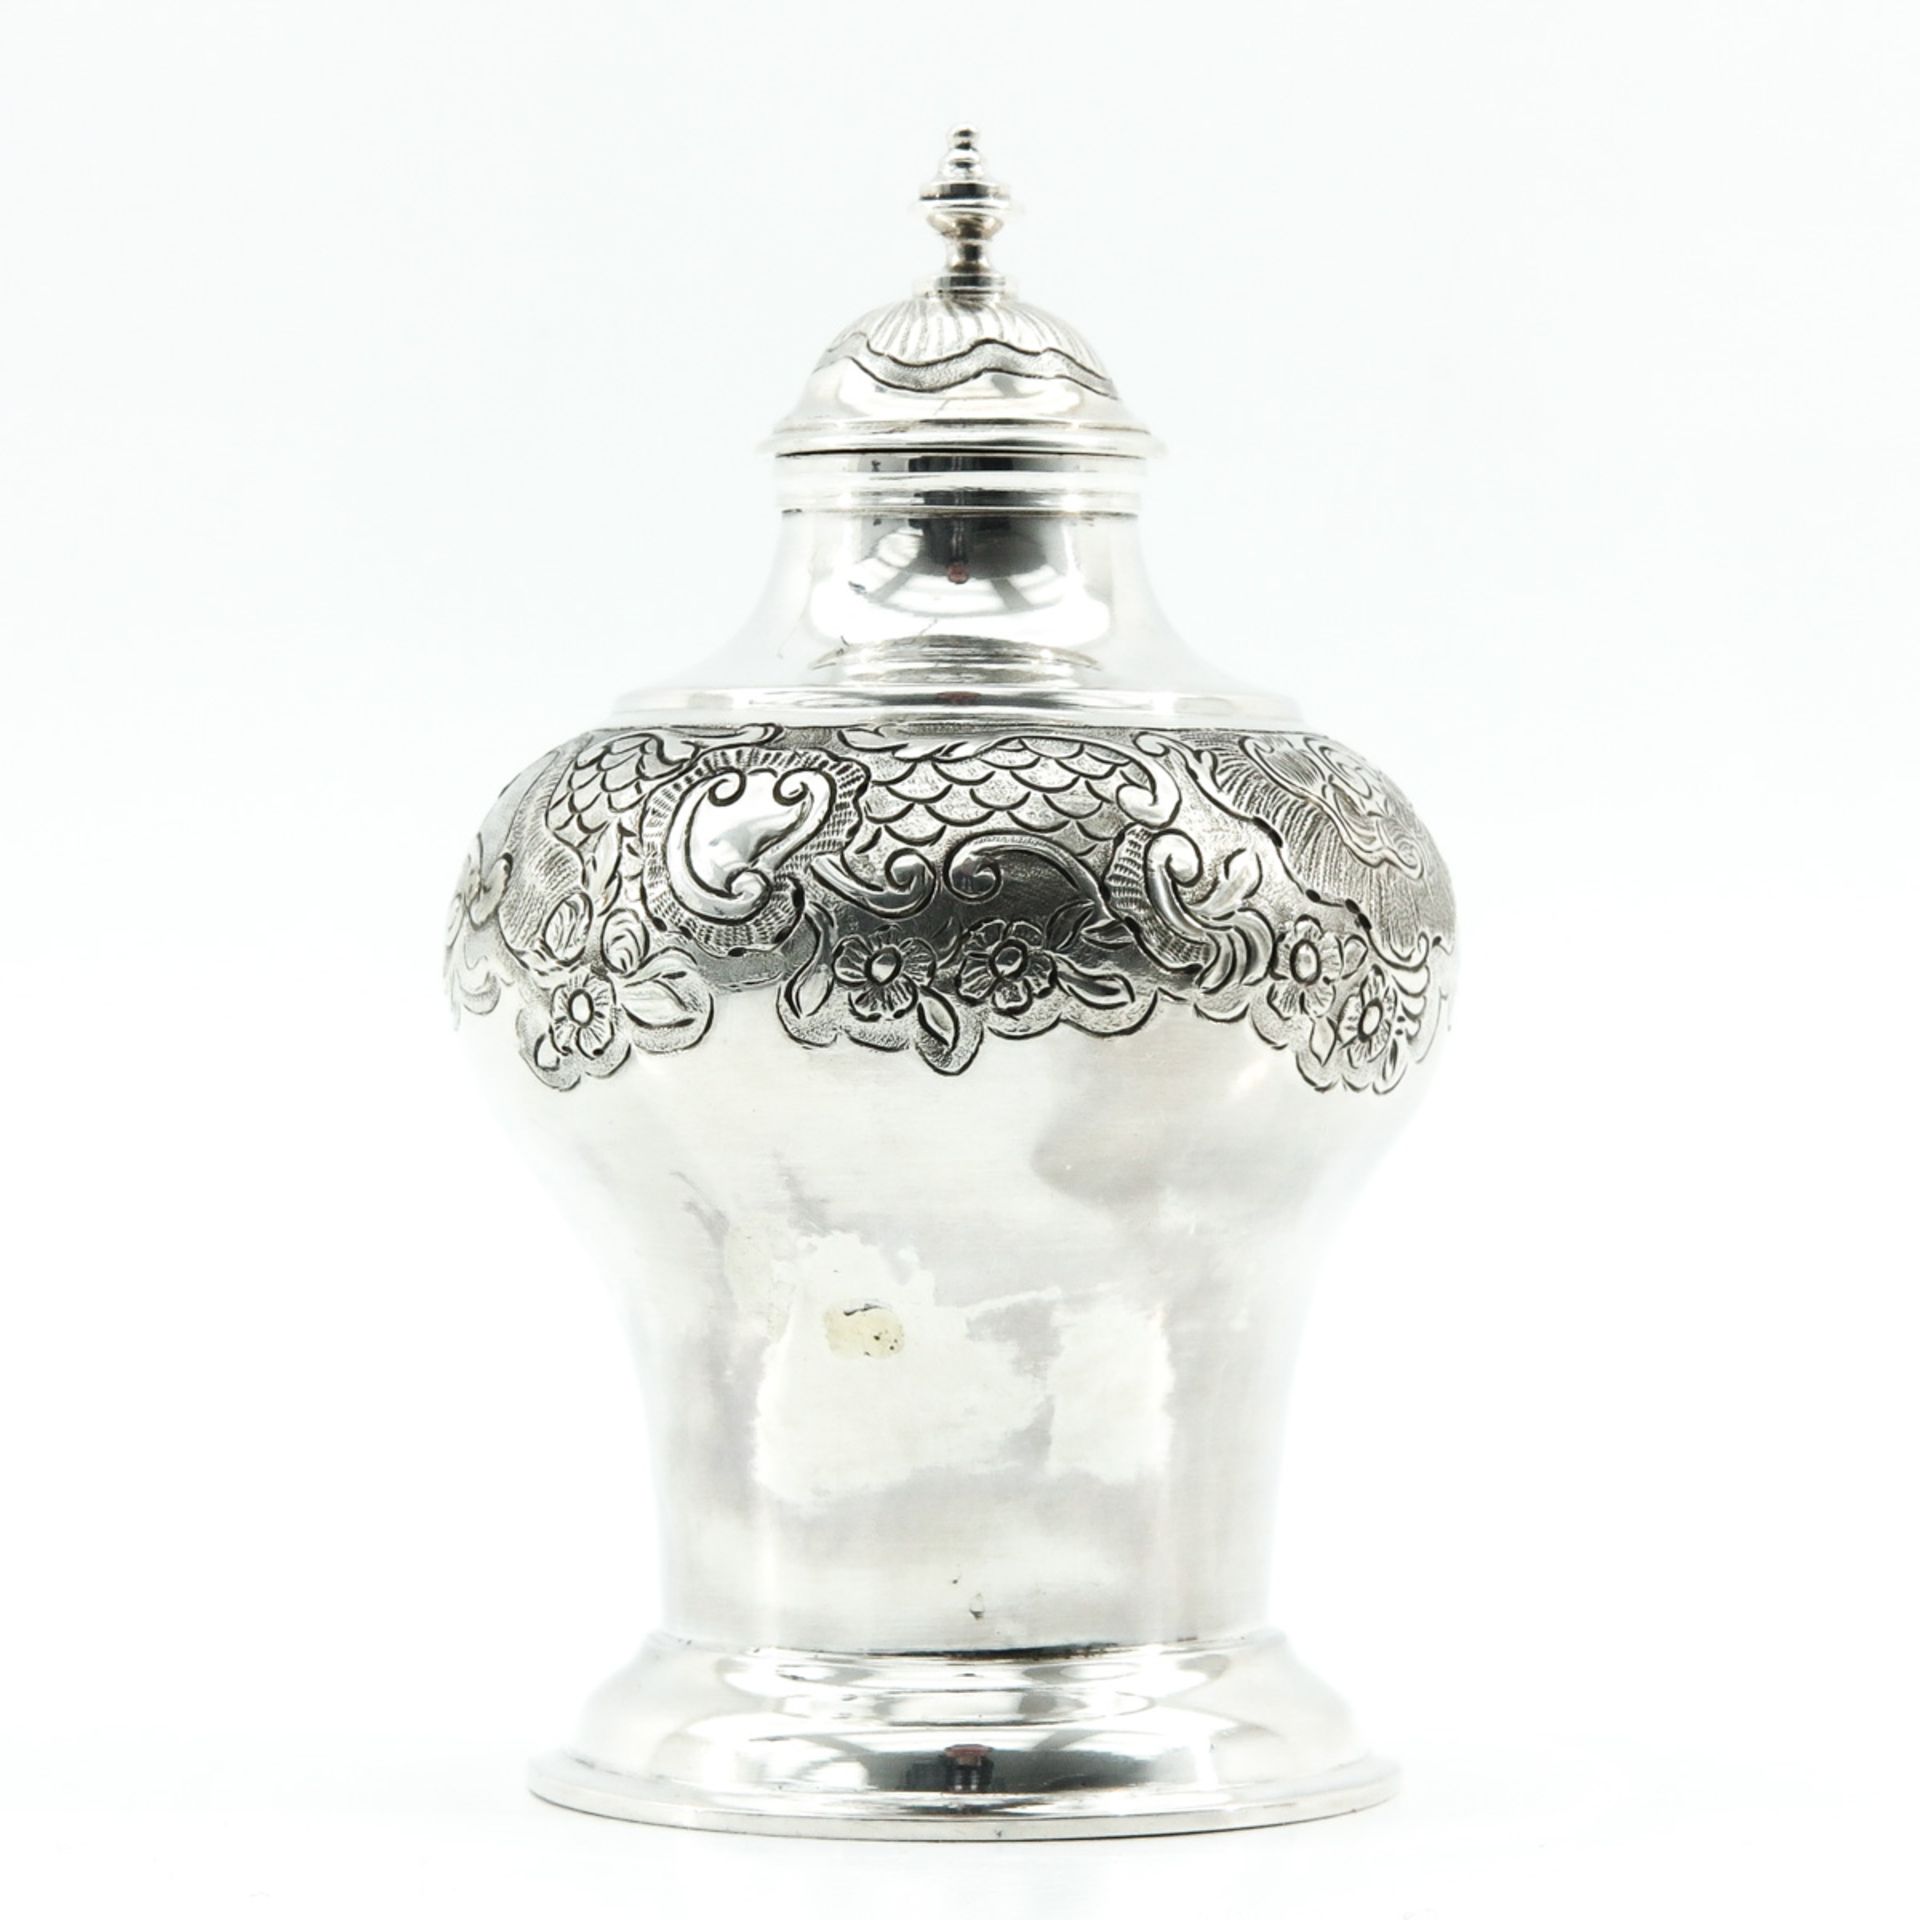 A Silver Tea Caddy - Image 3 of 10